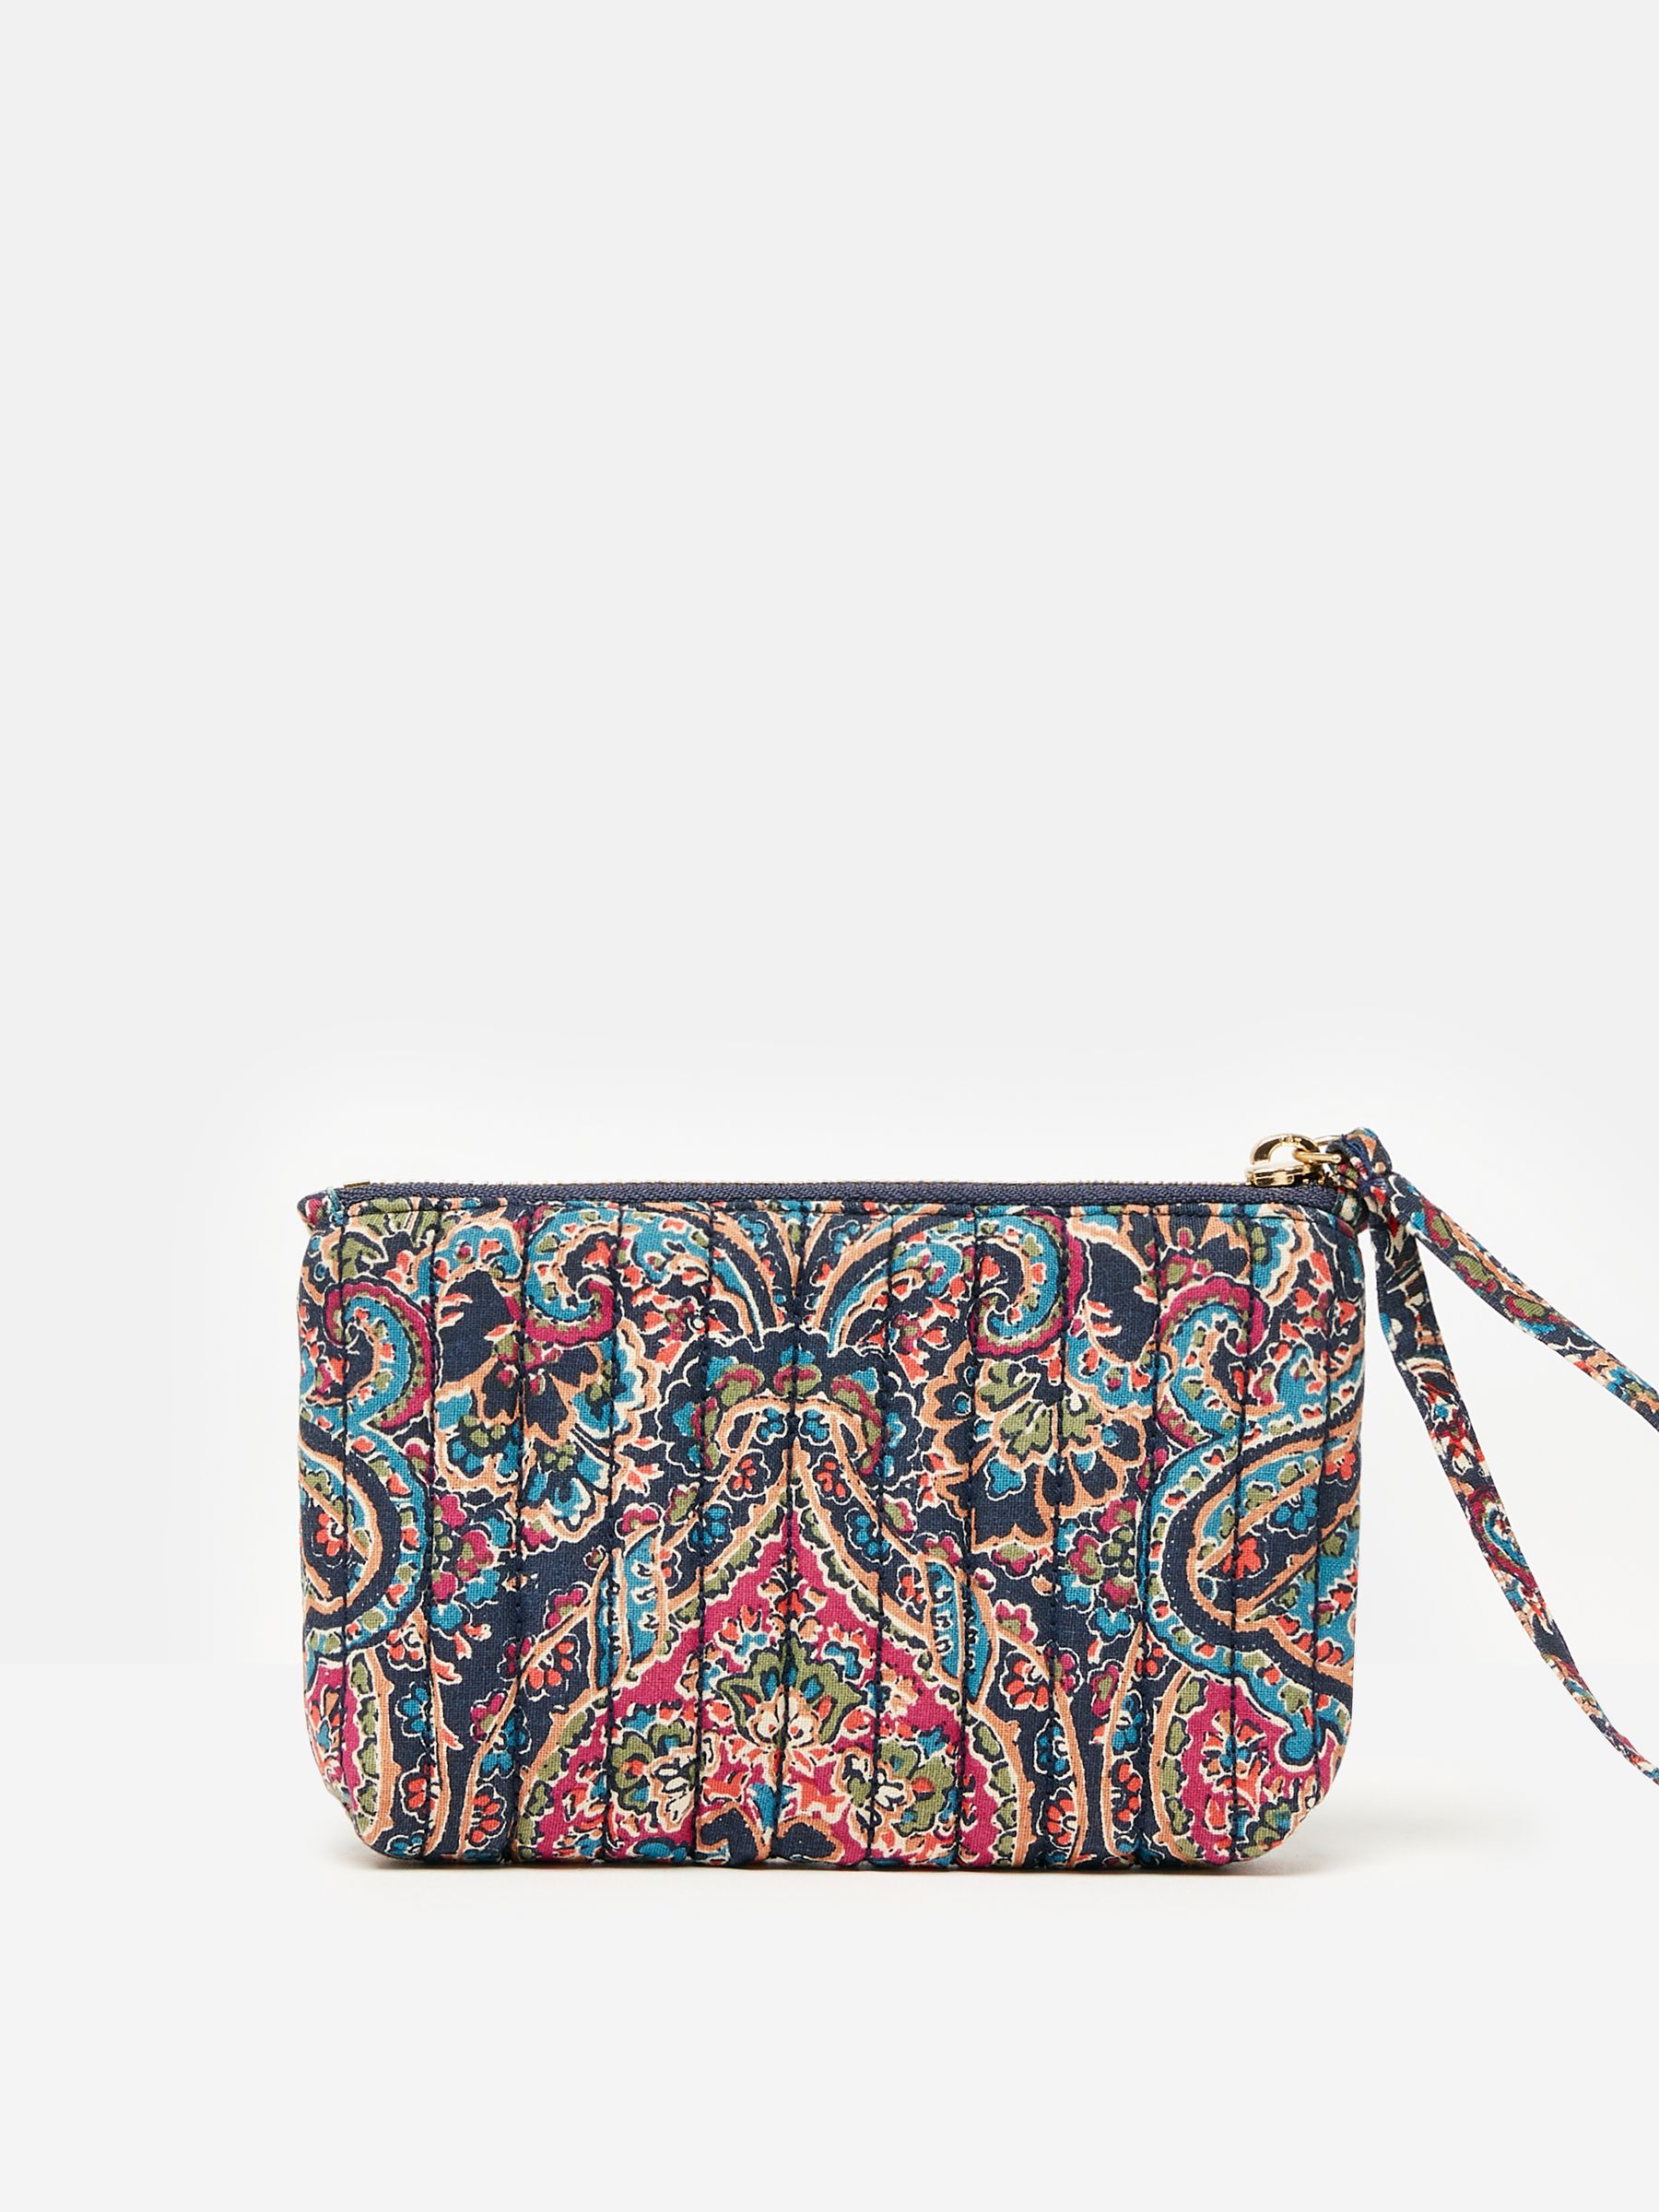 Buy Daphne Navy Paisley Wrist Purse from the Joules online shop